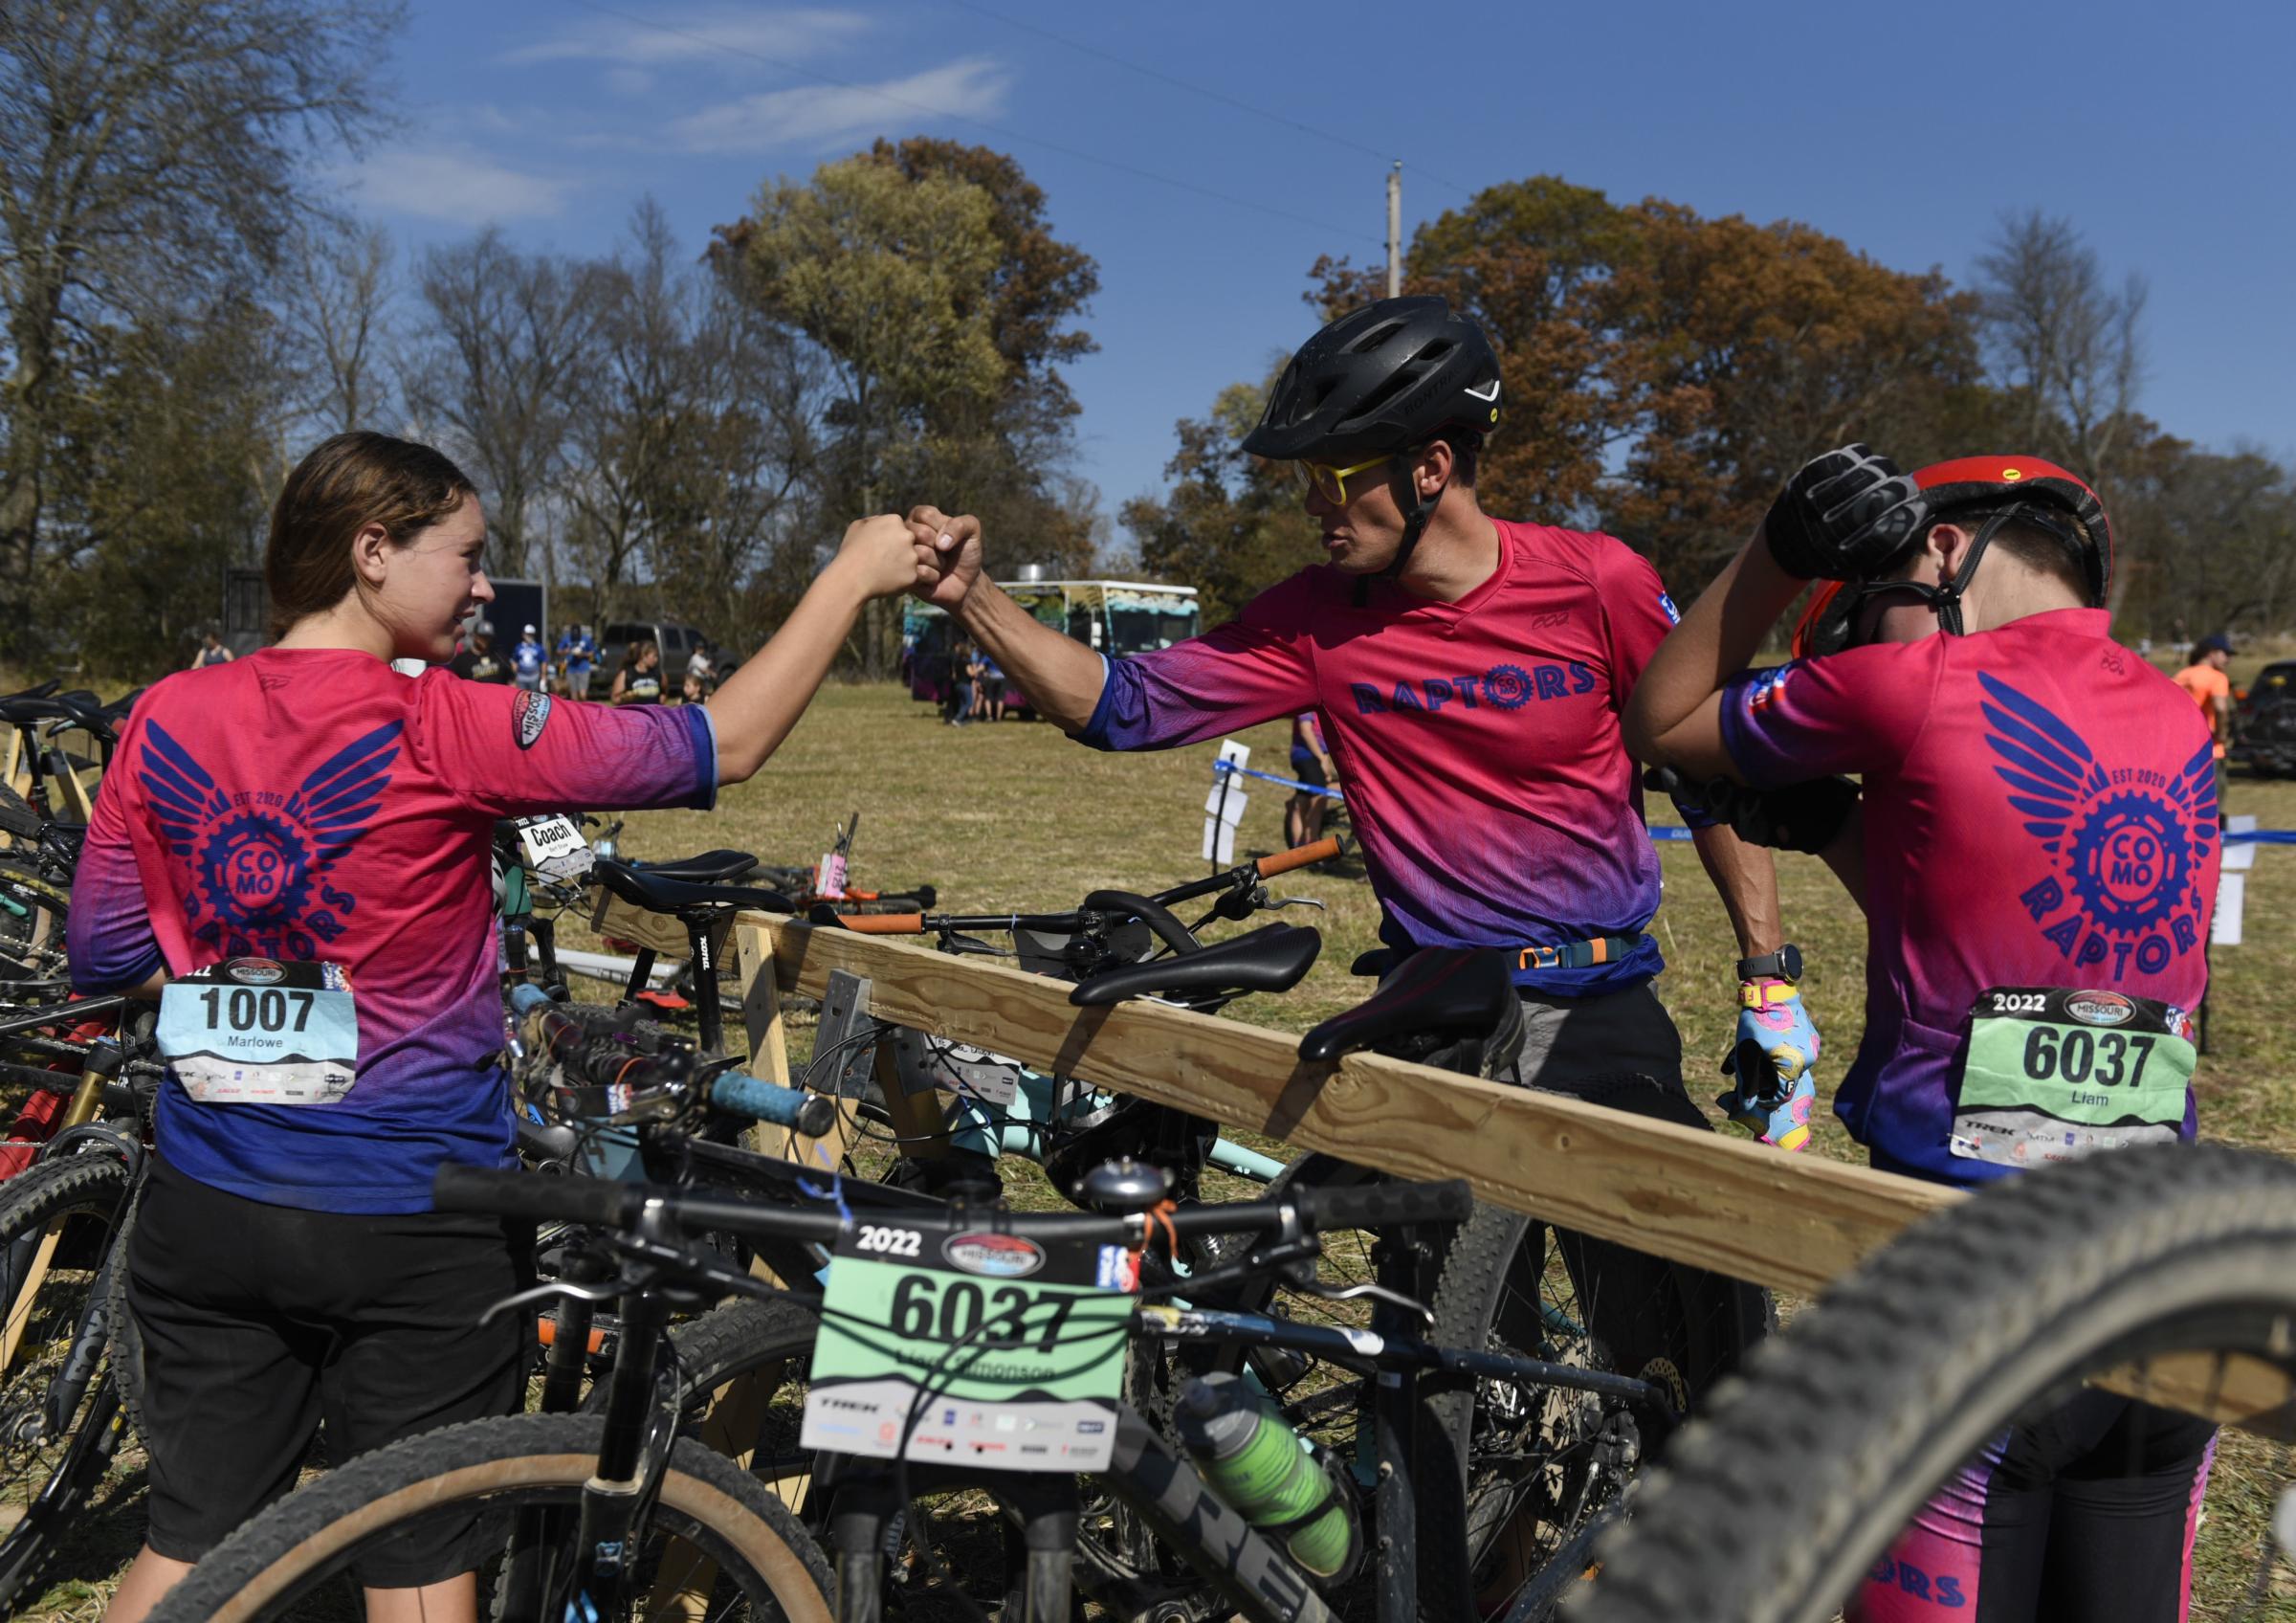 Community, competition and mountain biking